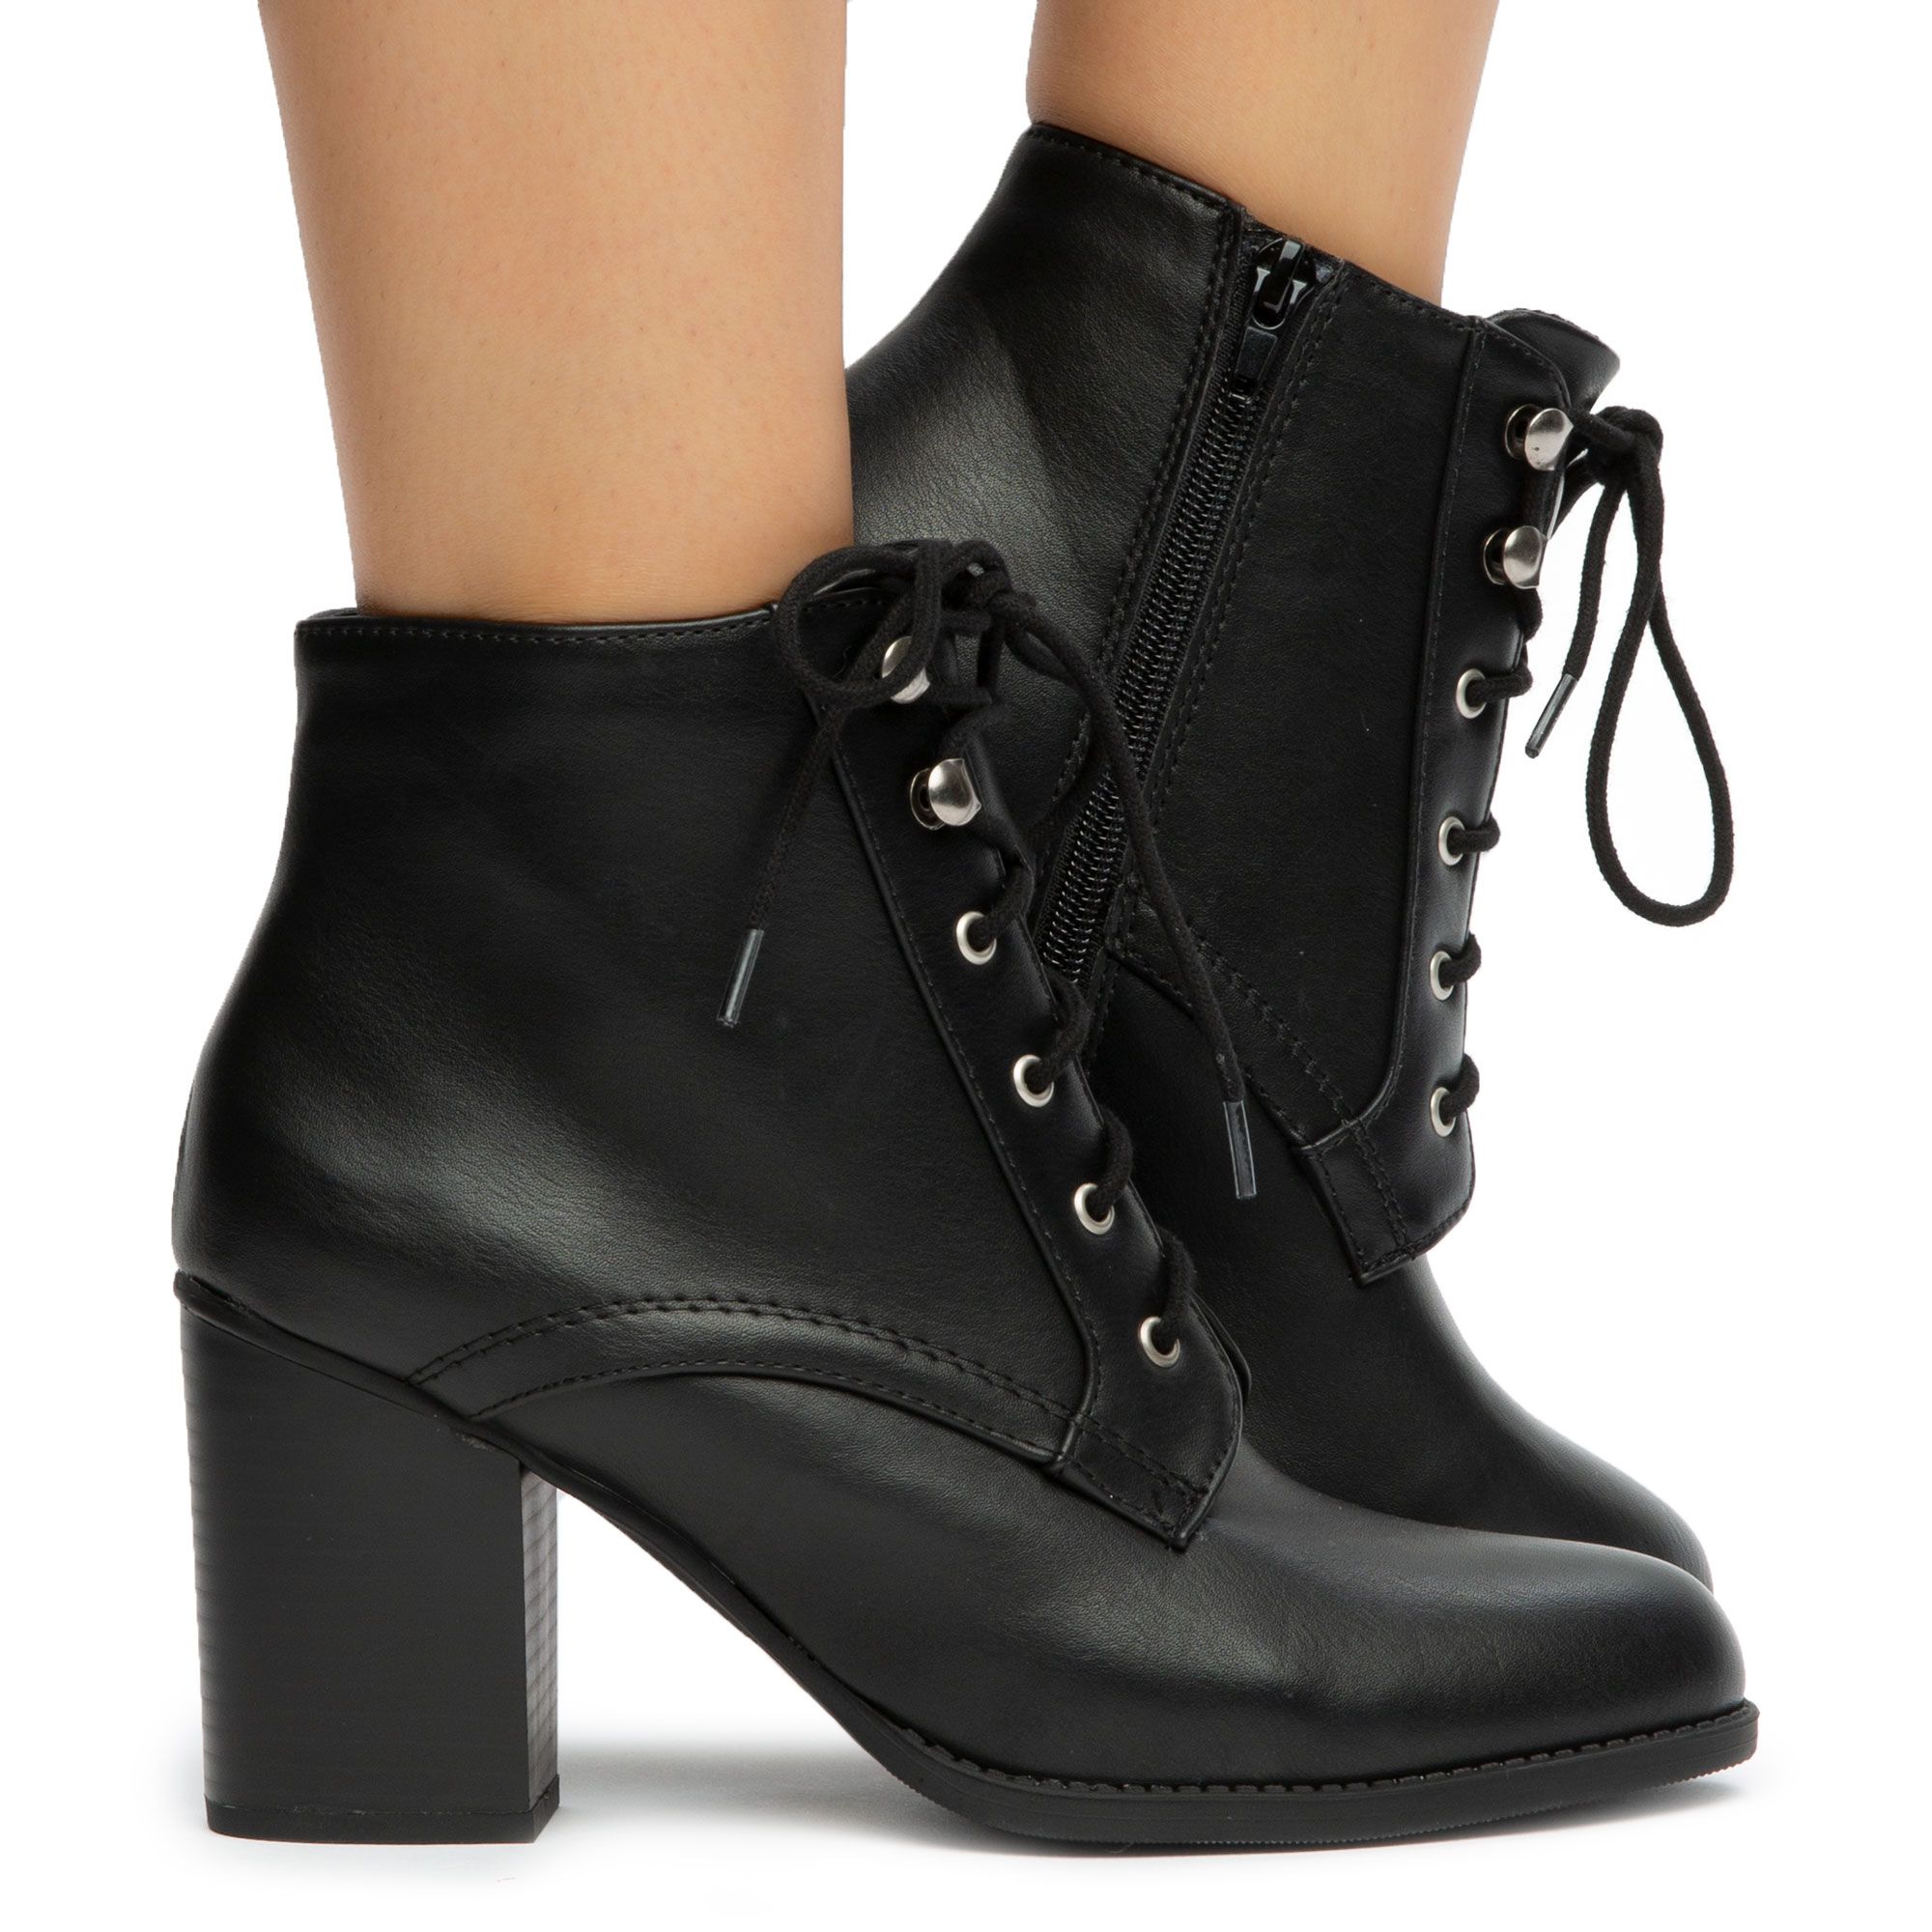 FORTUNE DYNAMICS Lurk-S Ankle Booties FD LURK-S-BLK - Shiekh